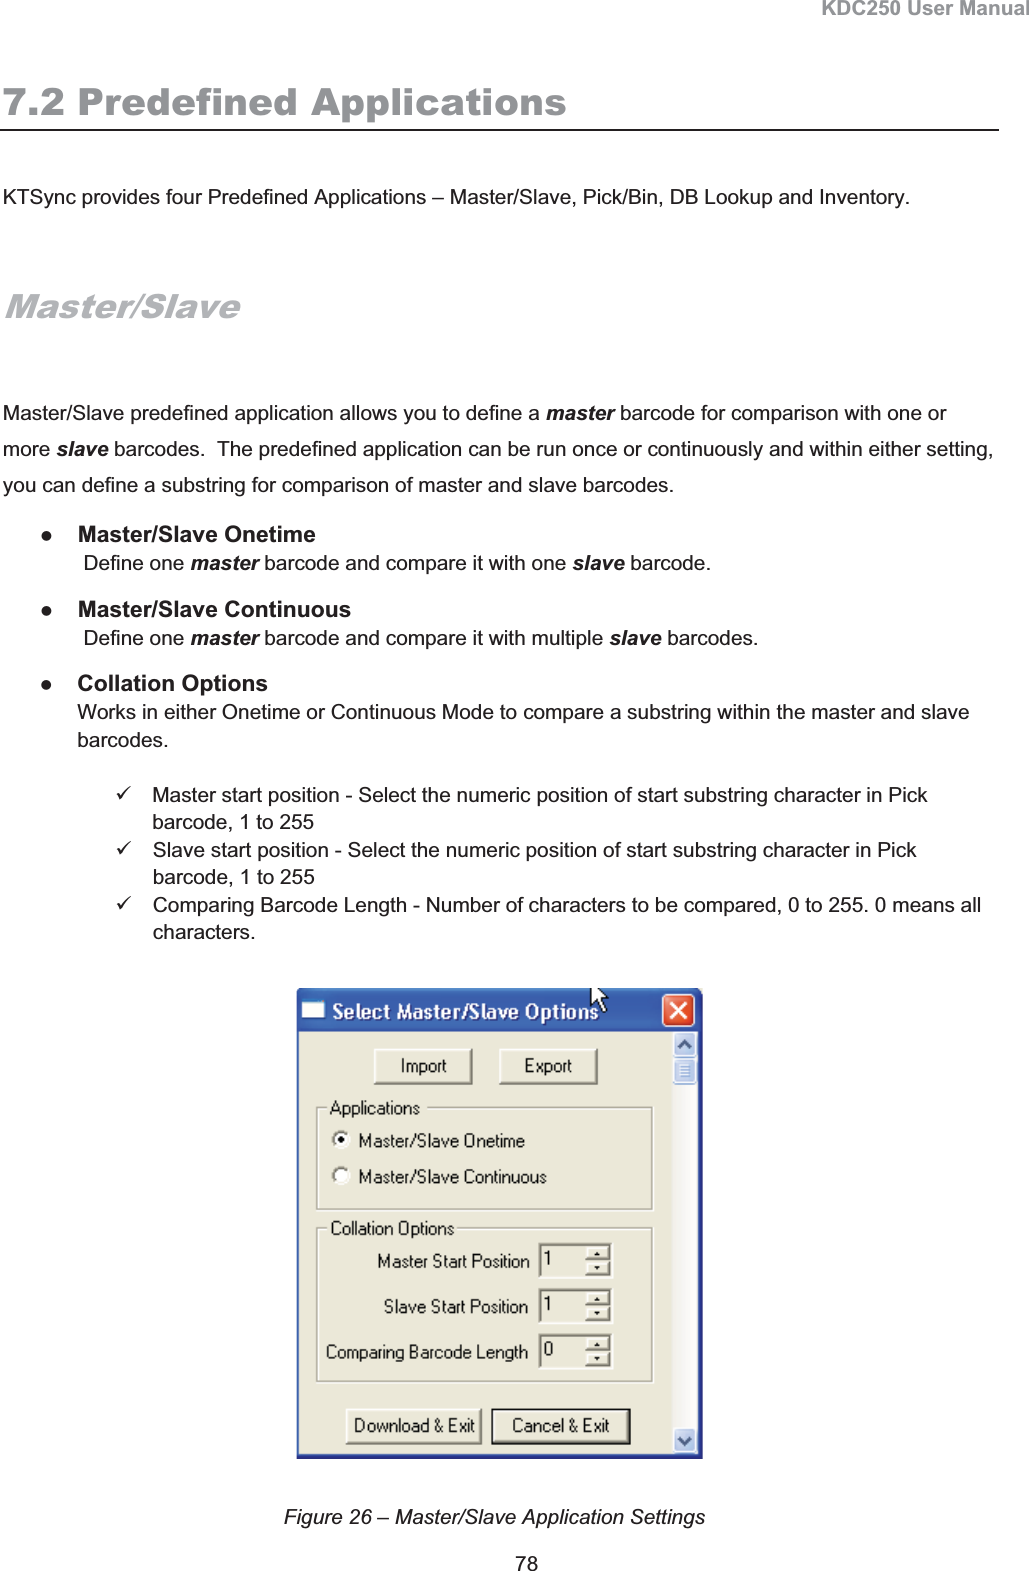 KDC250 User Manual 78 7.2 Predefined Applications KTSync provides four Predefined Applications – Master/Slave, Pick/Bin, DB Lookup and Inventory.  Master/SlaveMaster/Slave predefined application allows you to define a master barcode for comparison with one or more slave barcodes.  The predefined application can be run once or continuously and within either setting, you can define a substring for comparison of master and slave barcodes. zMaster/Slave Onetime  Define one master barcode and compare it with one slave barcode. zMaster/Slave Continuous  Define one master barcode and compare it with multiple slave barcodes. zCollation Options Works in either Onetime or Continuous Mode to compare a substring within the master and slave barcodes. 9  Master start position - Select the numeric position of start substring character in Pick barcode, 1 to 255 9  Slave start position - Select the numeric position of start substring character in Pick barcode, 1 to 255 9  Comparing Barcode Length - Number of characters to be compared, 0 to 255. 0 means all characters. Figure 26 – Master/Slave Application Settings